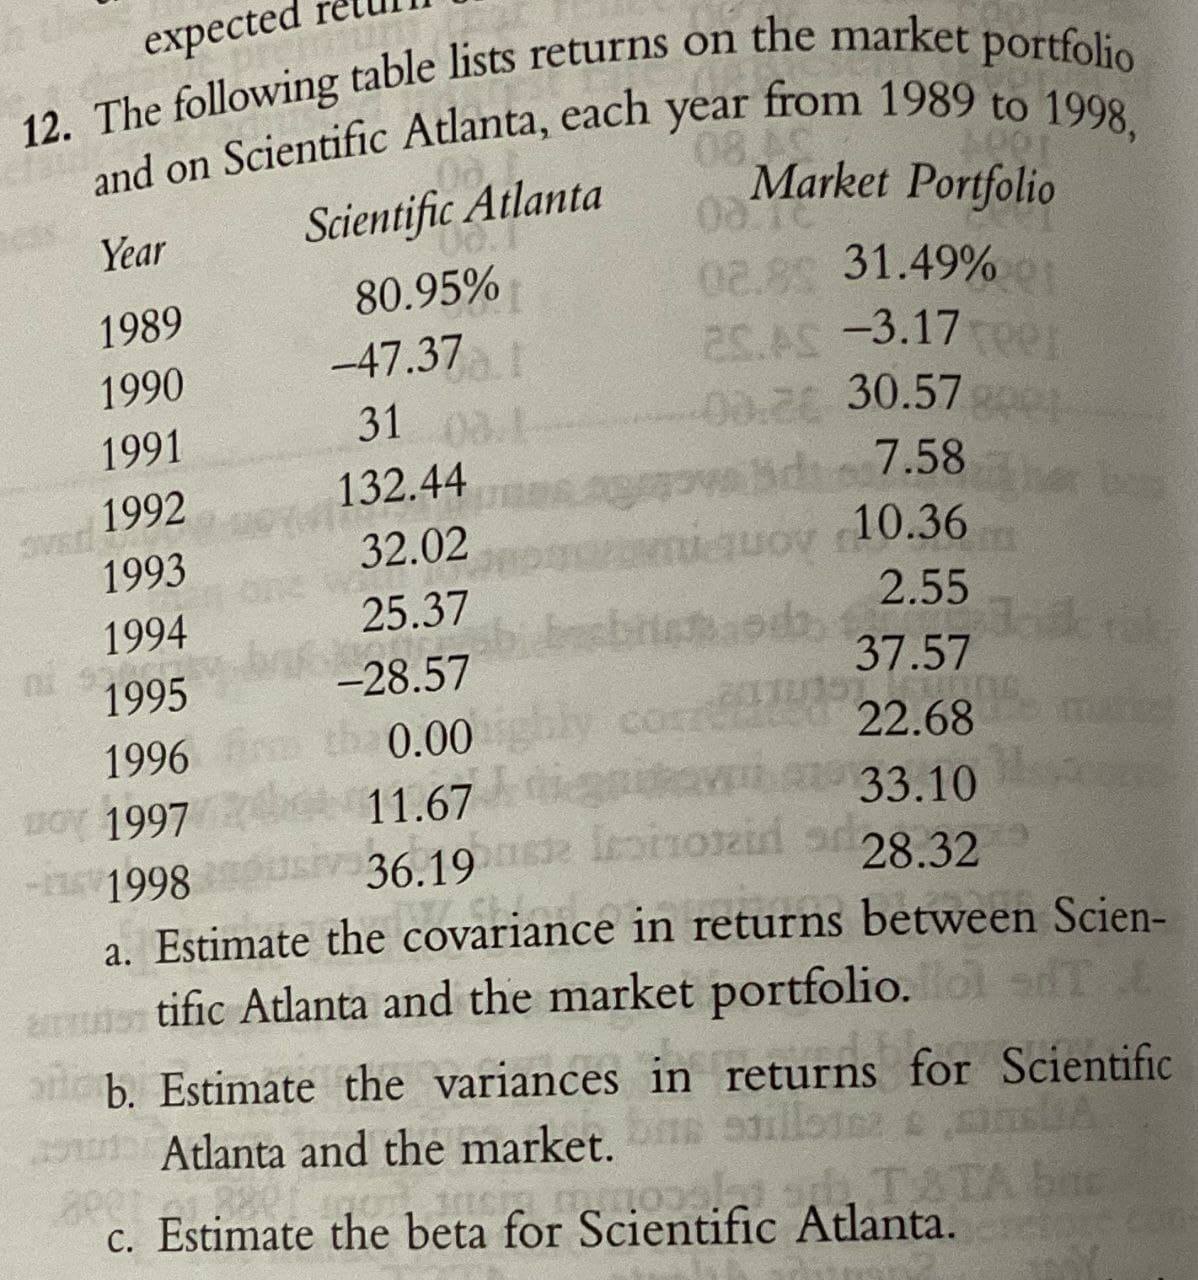 expected
12. The following table lists returns on the market portfolio
and on Scientific Atlanta, each year from 1989 to 1998,
Year
1989
Scientific Atlanta
80.95%
08 AS
Market Portfolio
08.1
02.89 31.49%
1990
-47.371
25.AS -3.17 per
1991
OVED 1992
31
03.1
00.26 30.57
132.44
ova bid 7.58
1993
32.02
10.36
1994
25.37
2.55
1995
-28.57
37.57
1996
0.00
22.68
BOY 1997
11.67
133.10
-1998
36.19
28.32
a. Estimate the covariance in returns between Scien-
tific Atlanta and the market portfolio. lol T
ab. Estimate the variances in returns for Scientific
Atlanta and the market, be still
c. Estimate the beta for Scientific Atlanta.
A